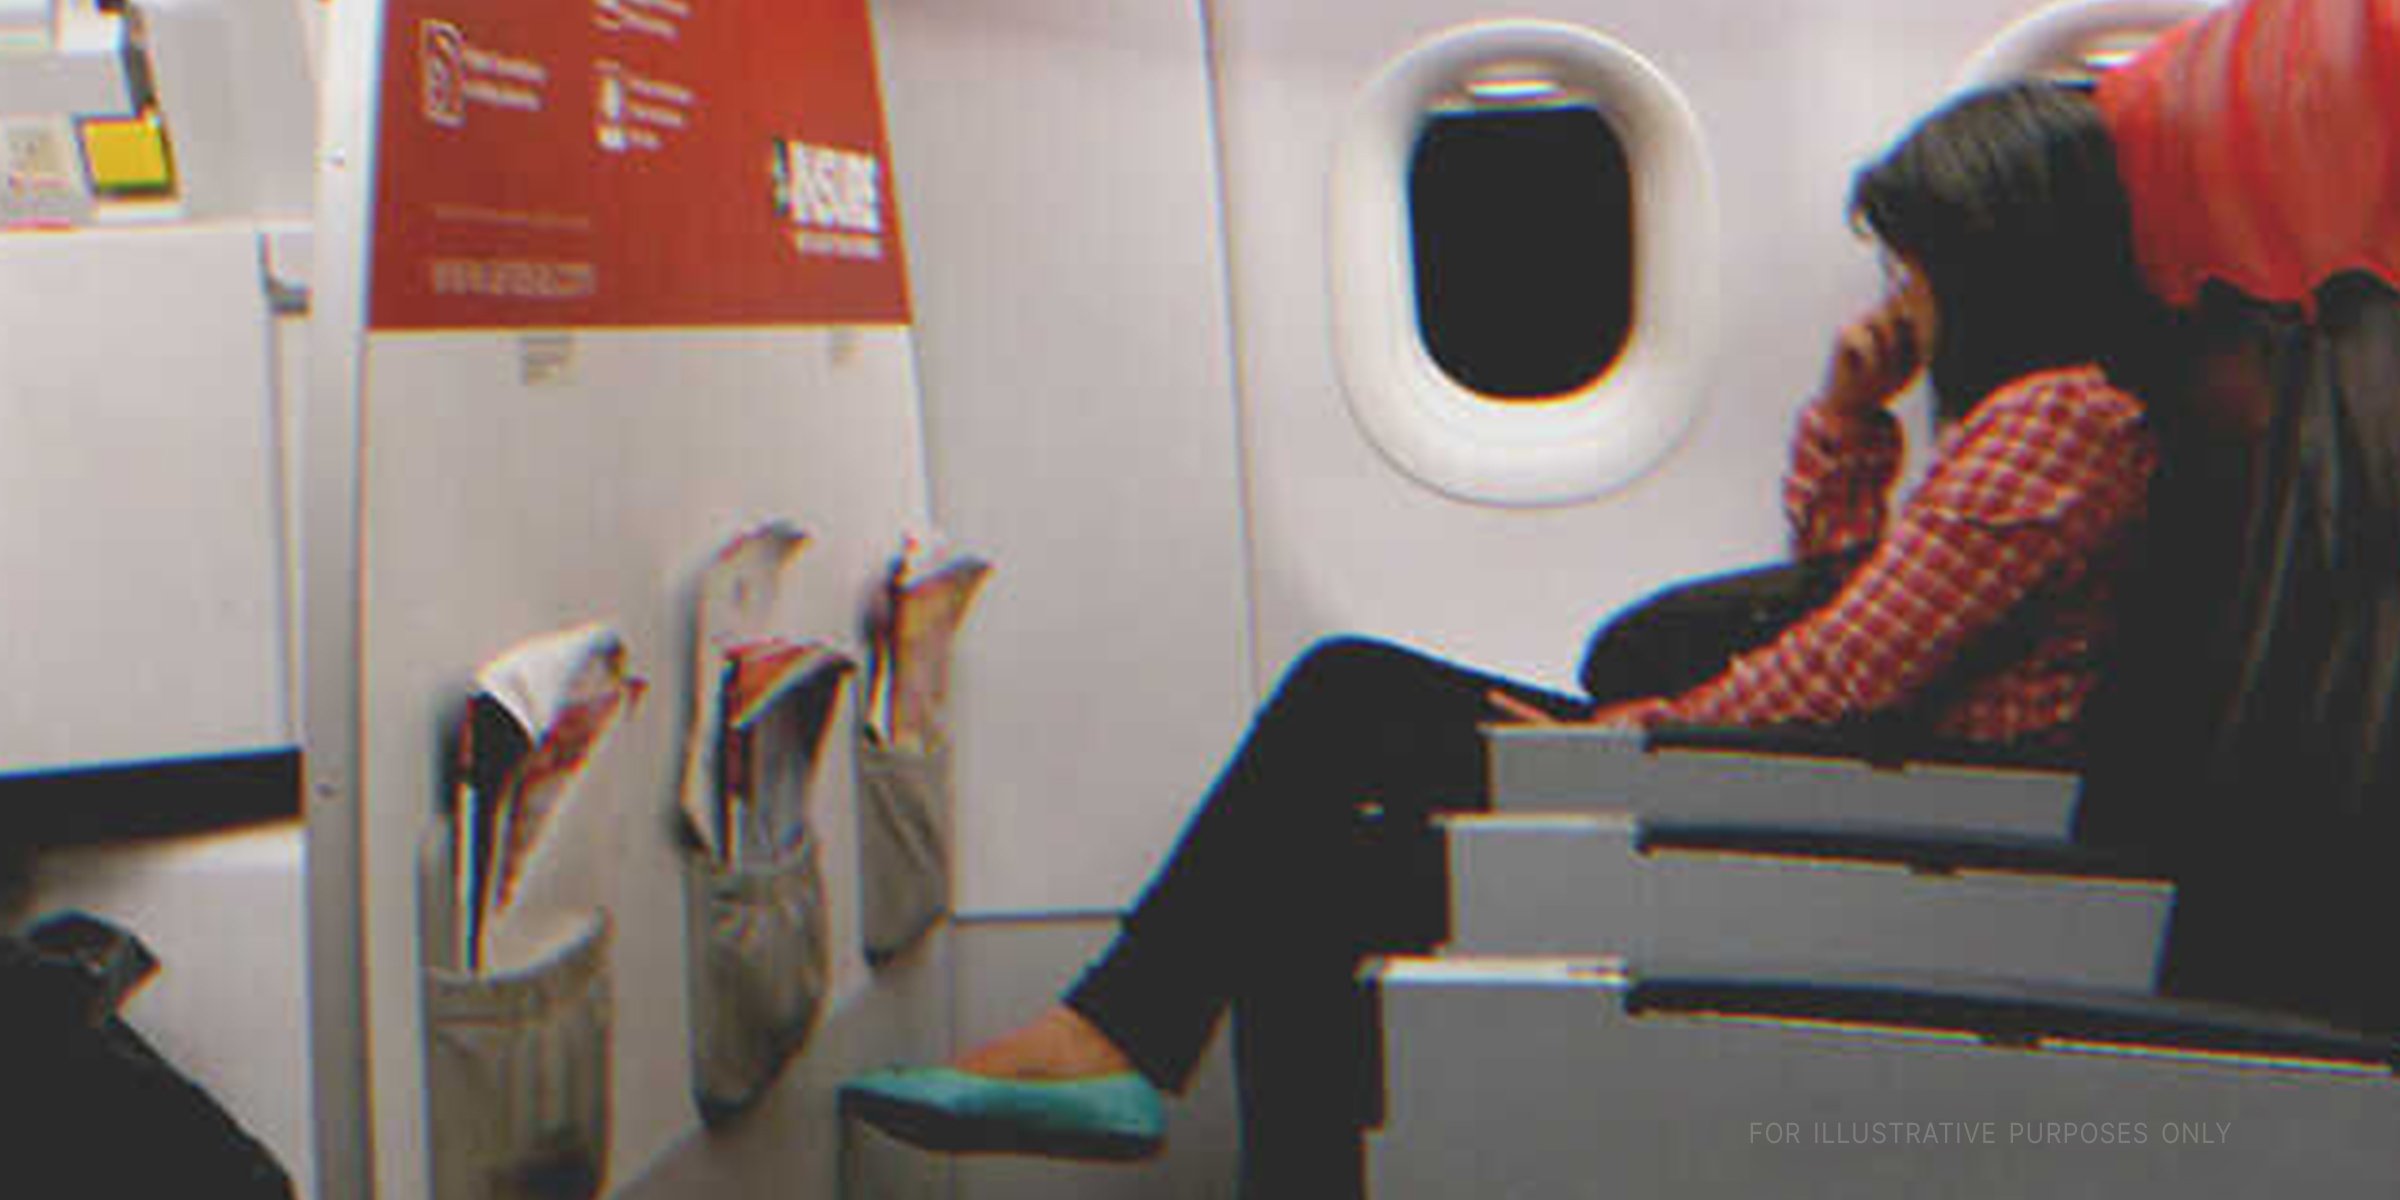 A crying lady sitting in a plane | Source: Flickr/Michael Coghlan